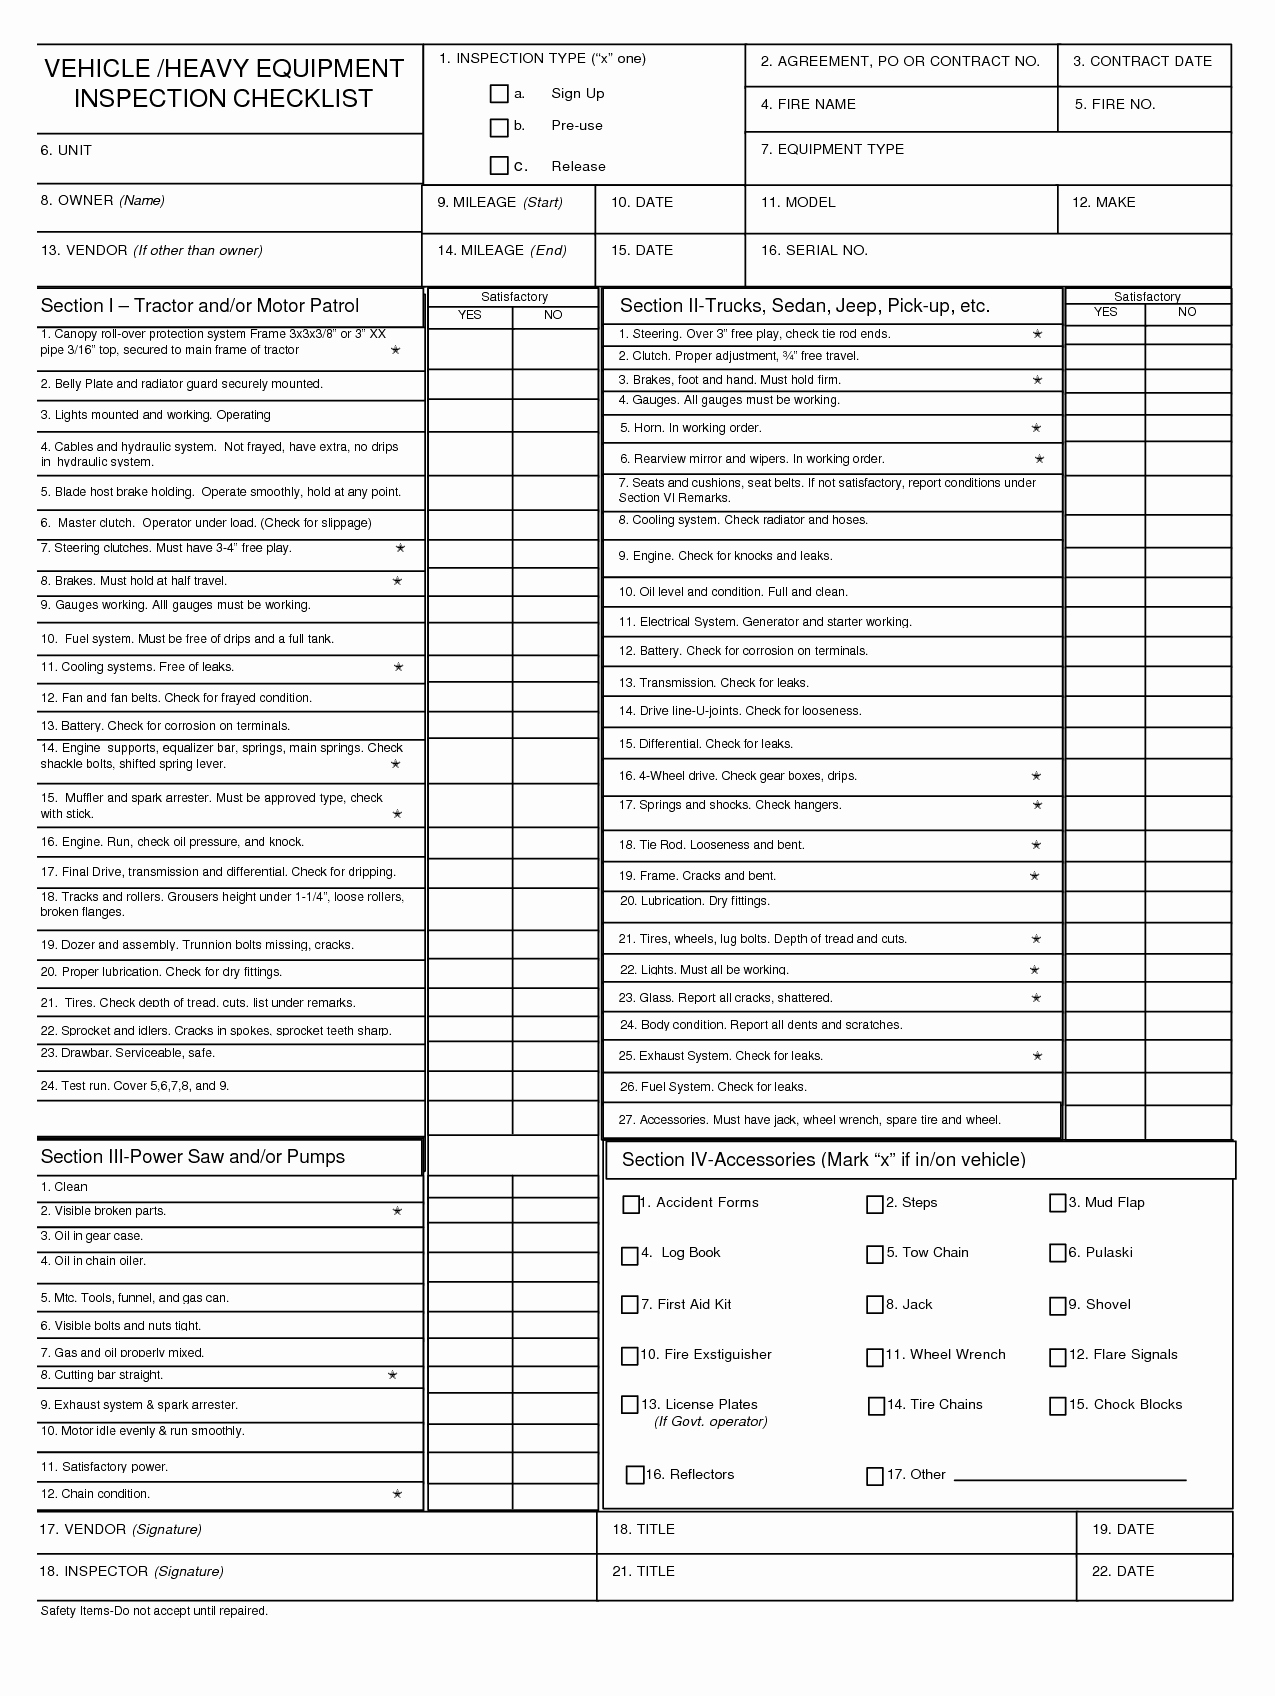 Best S Of Equipment Inspection Checklist Template